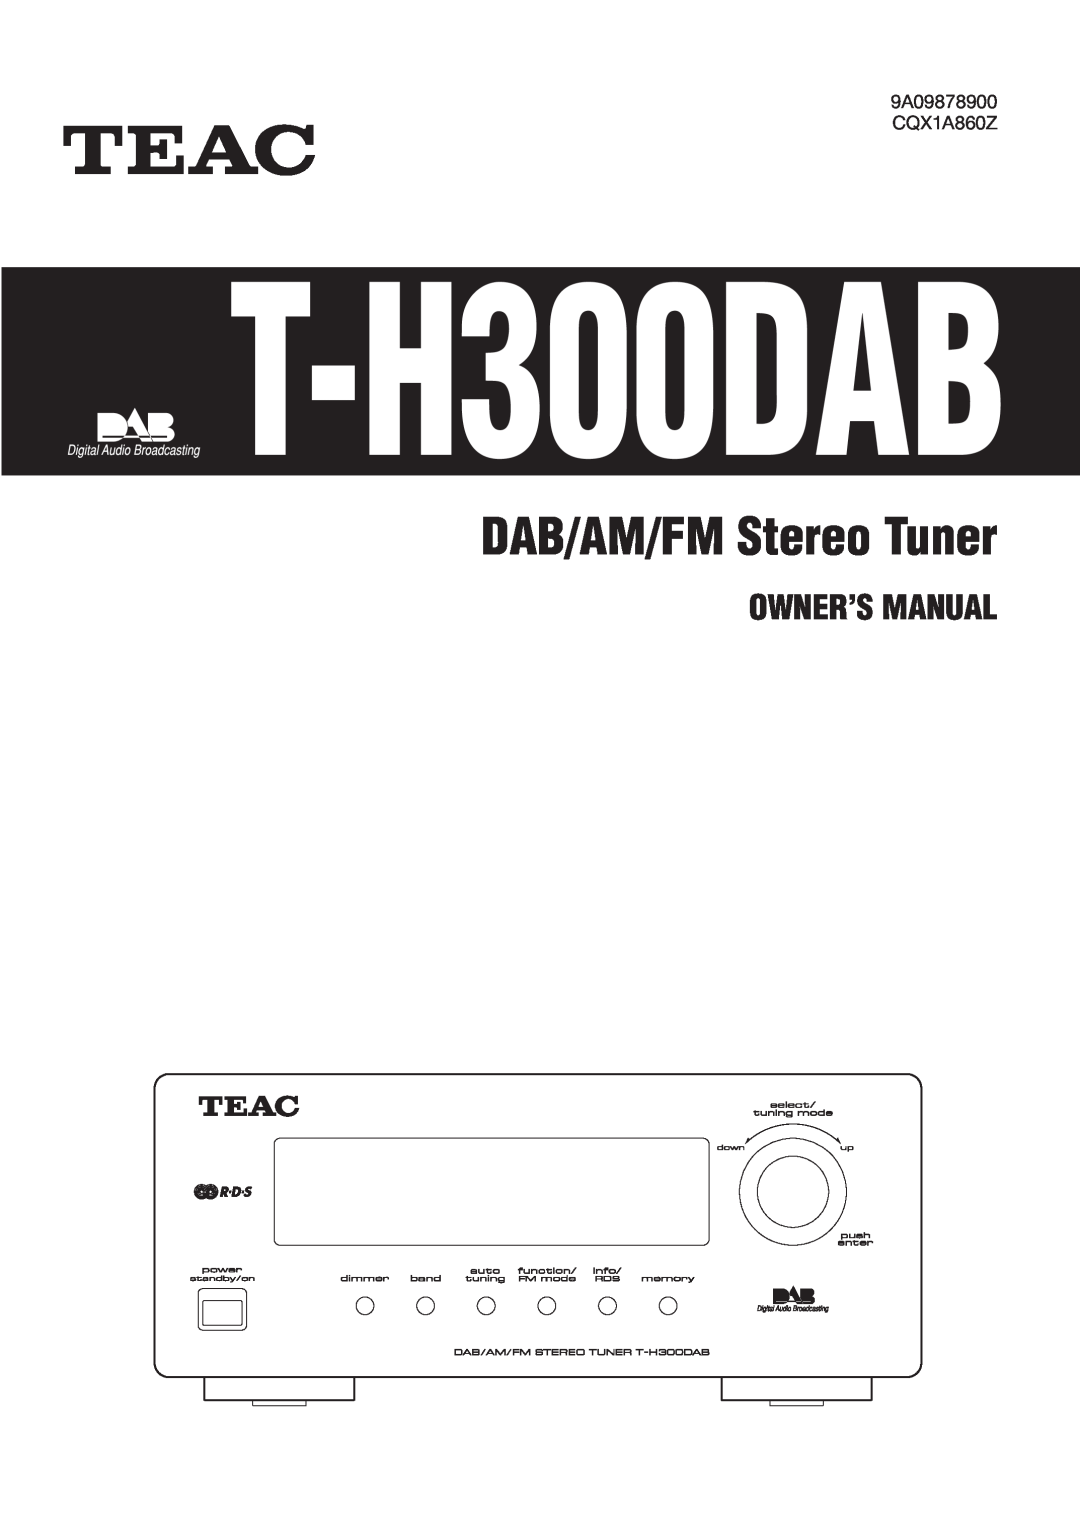 Teac T-H300DAB owner manual DAB/AM/FM Stereo Tuner 